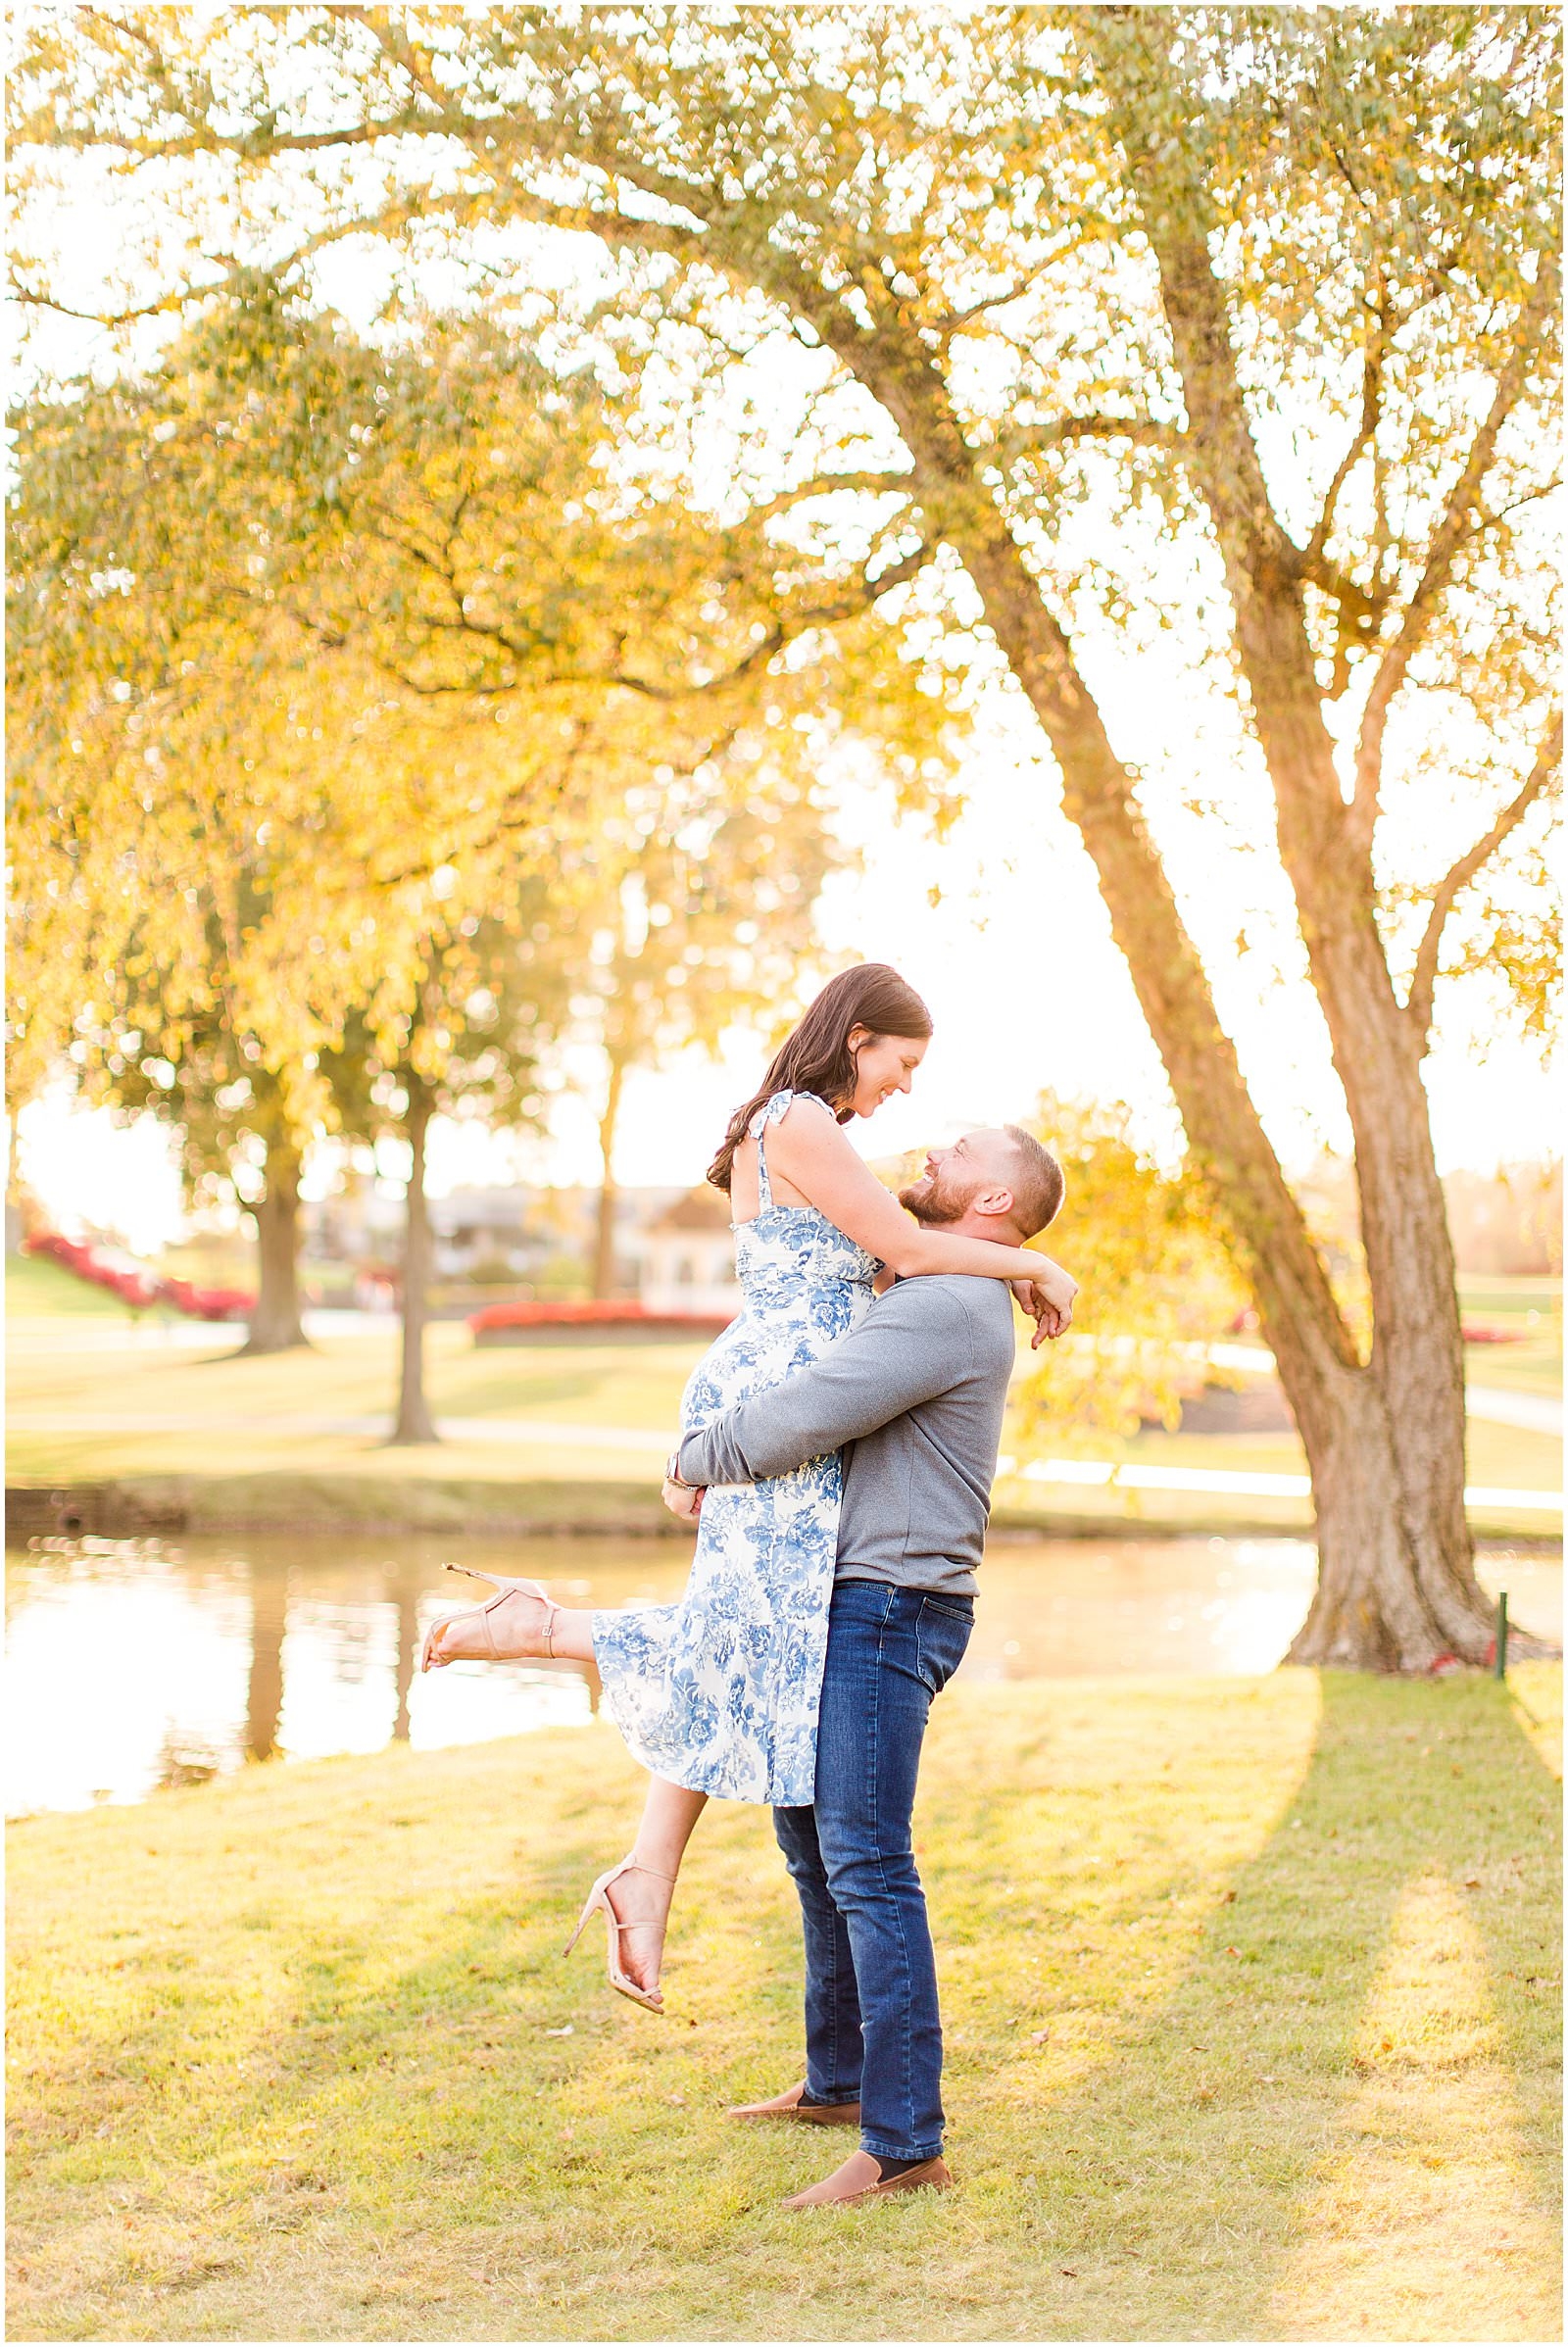 A Rolling Hills Country Club Engagement Session | Meagan and Kyle | Bret and Brandie Photography 0042.jpg